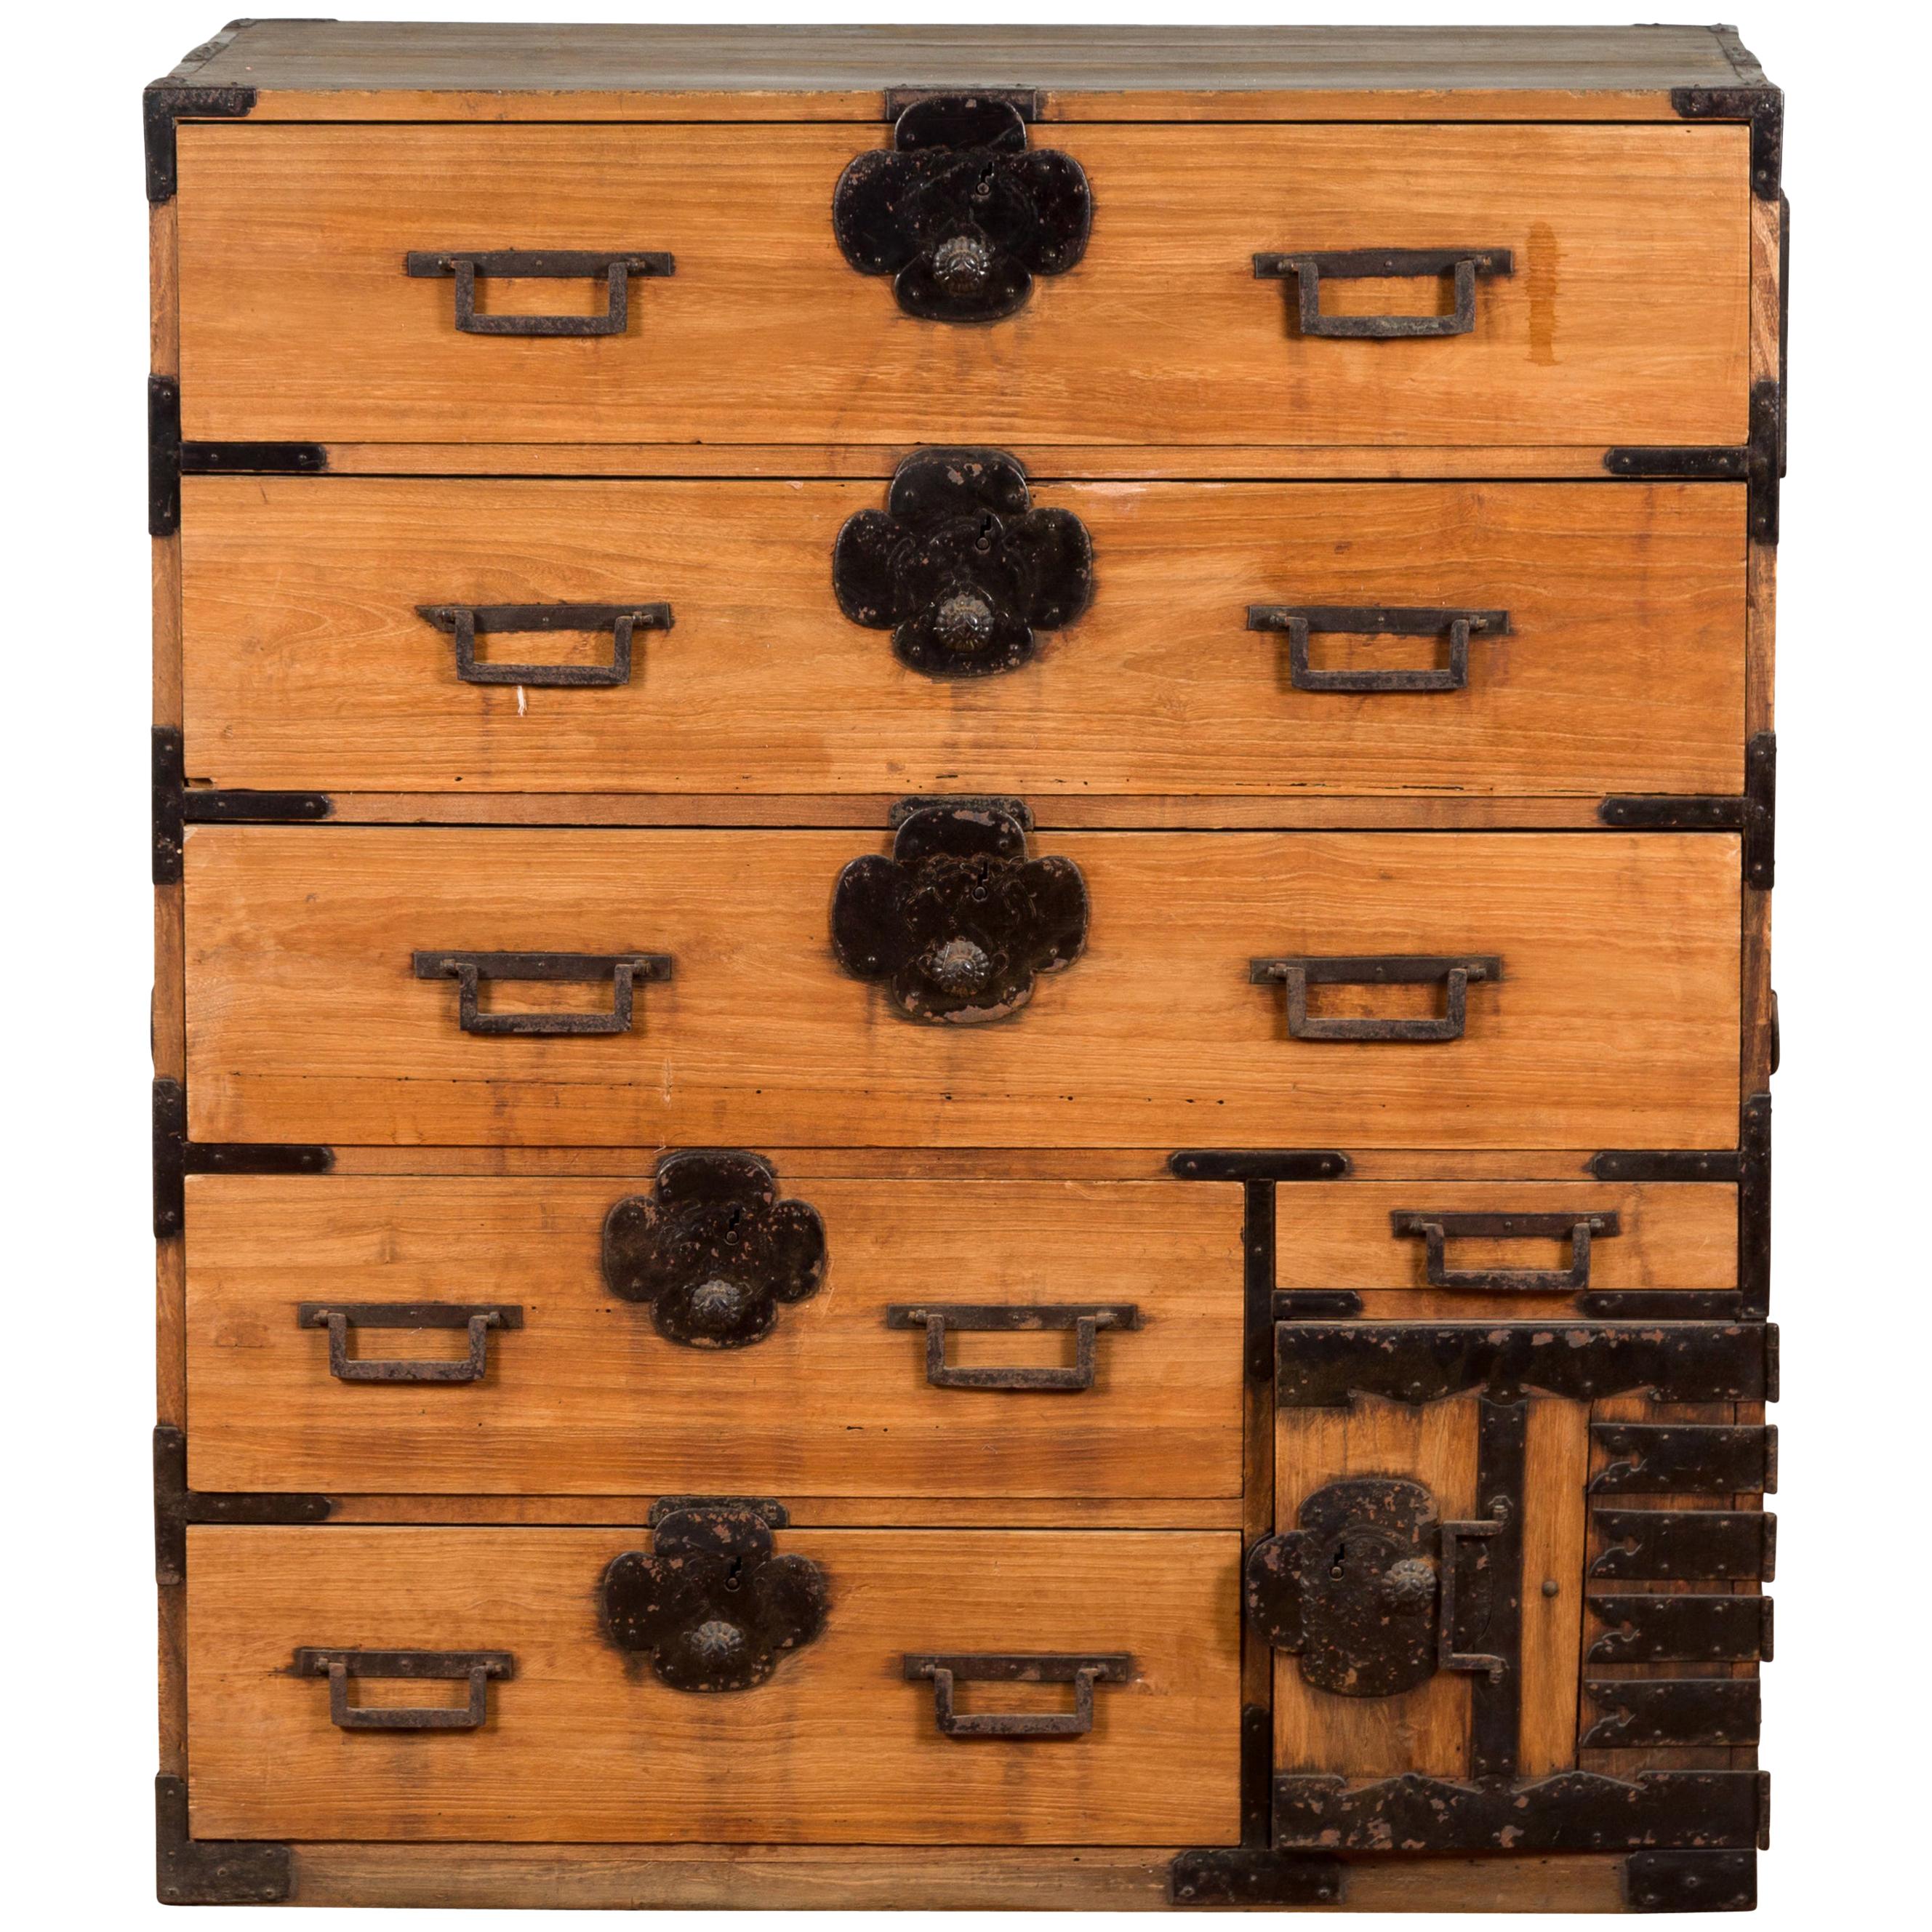 Japanese Meiji Period 19th Century Choba-Dansu Chest with Drawers and Safety Box